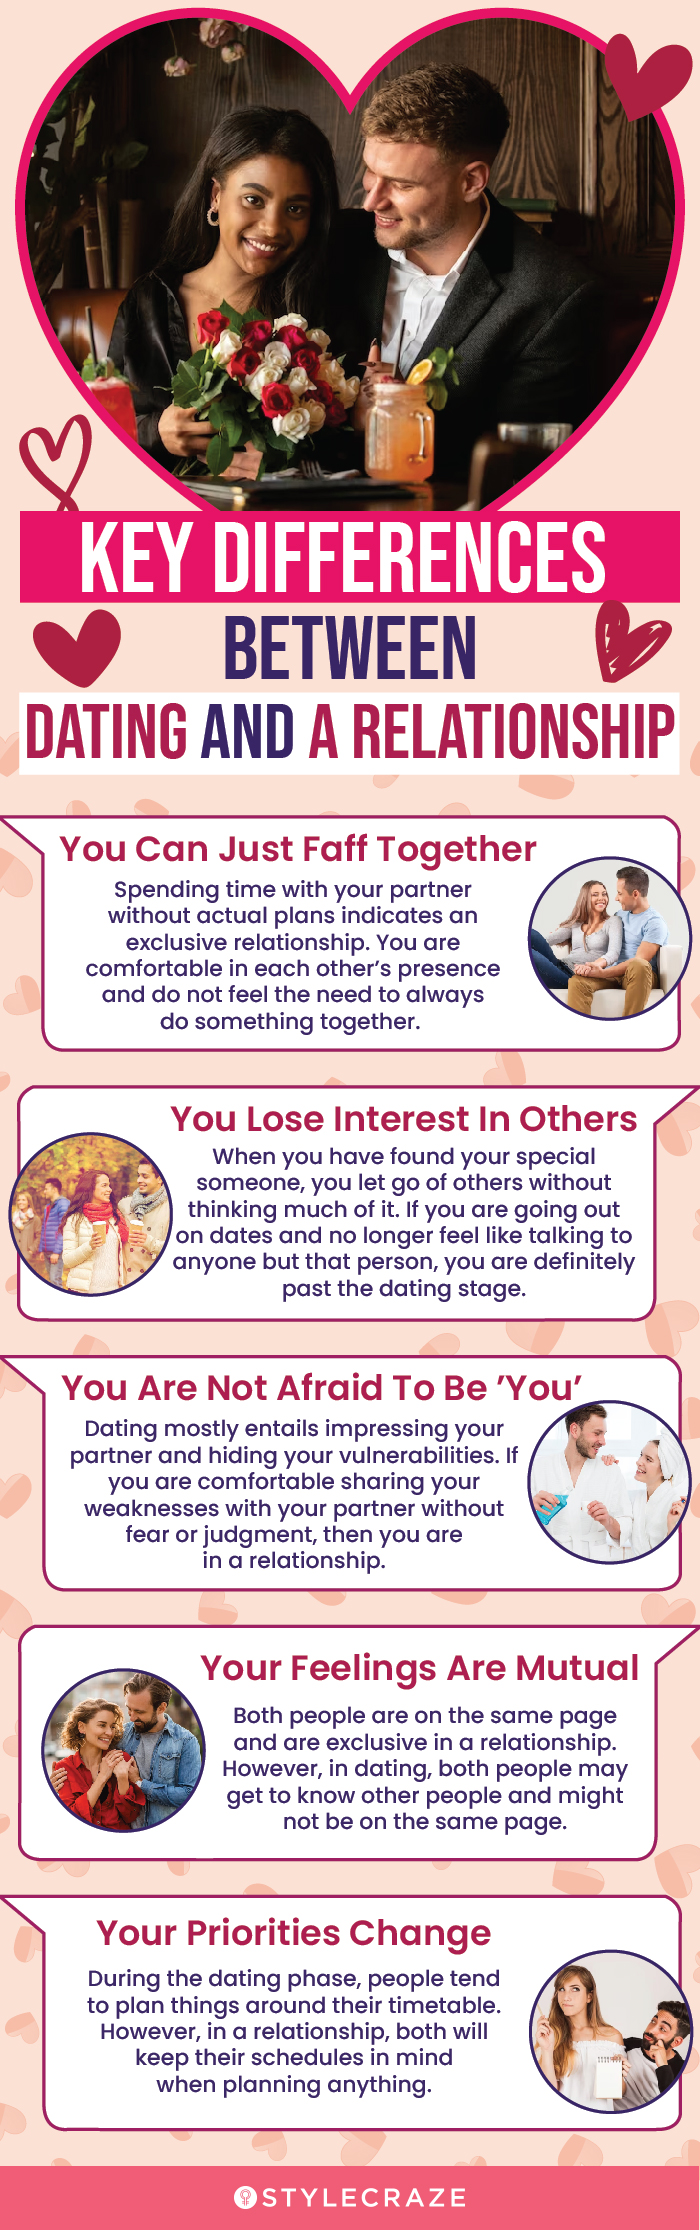 key differences between dating and a relationship (infographic)